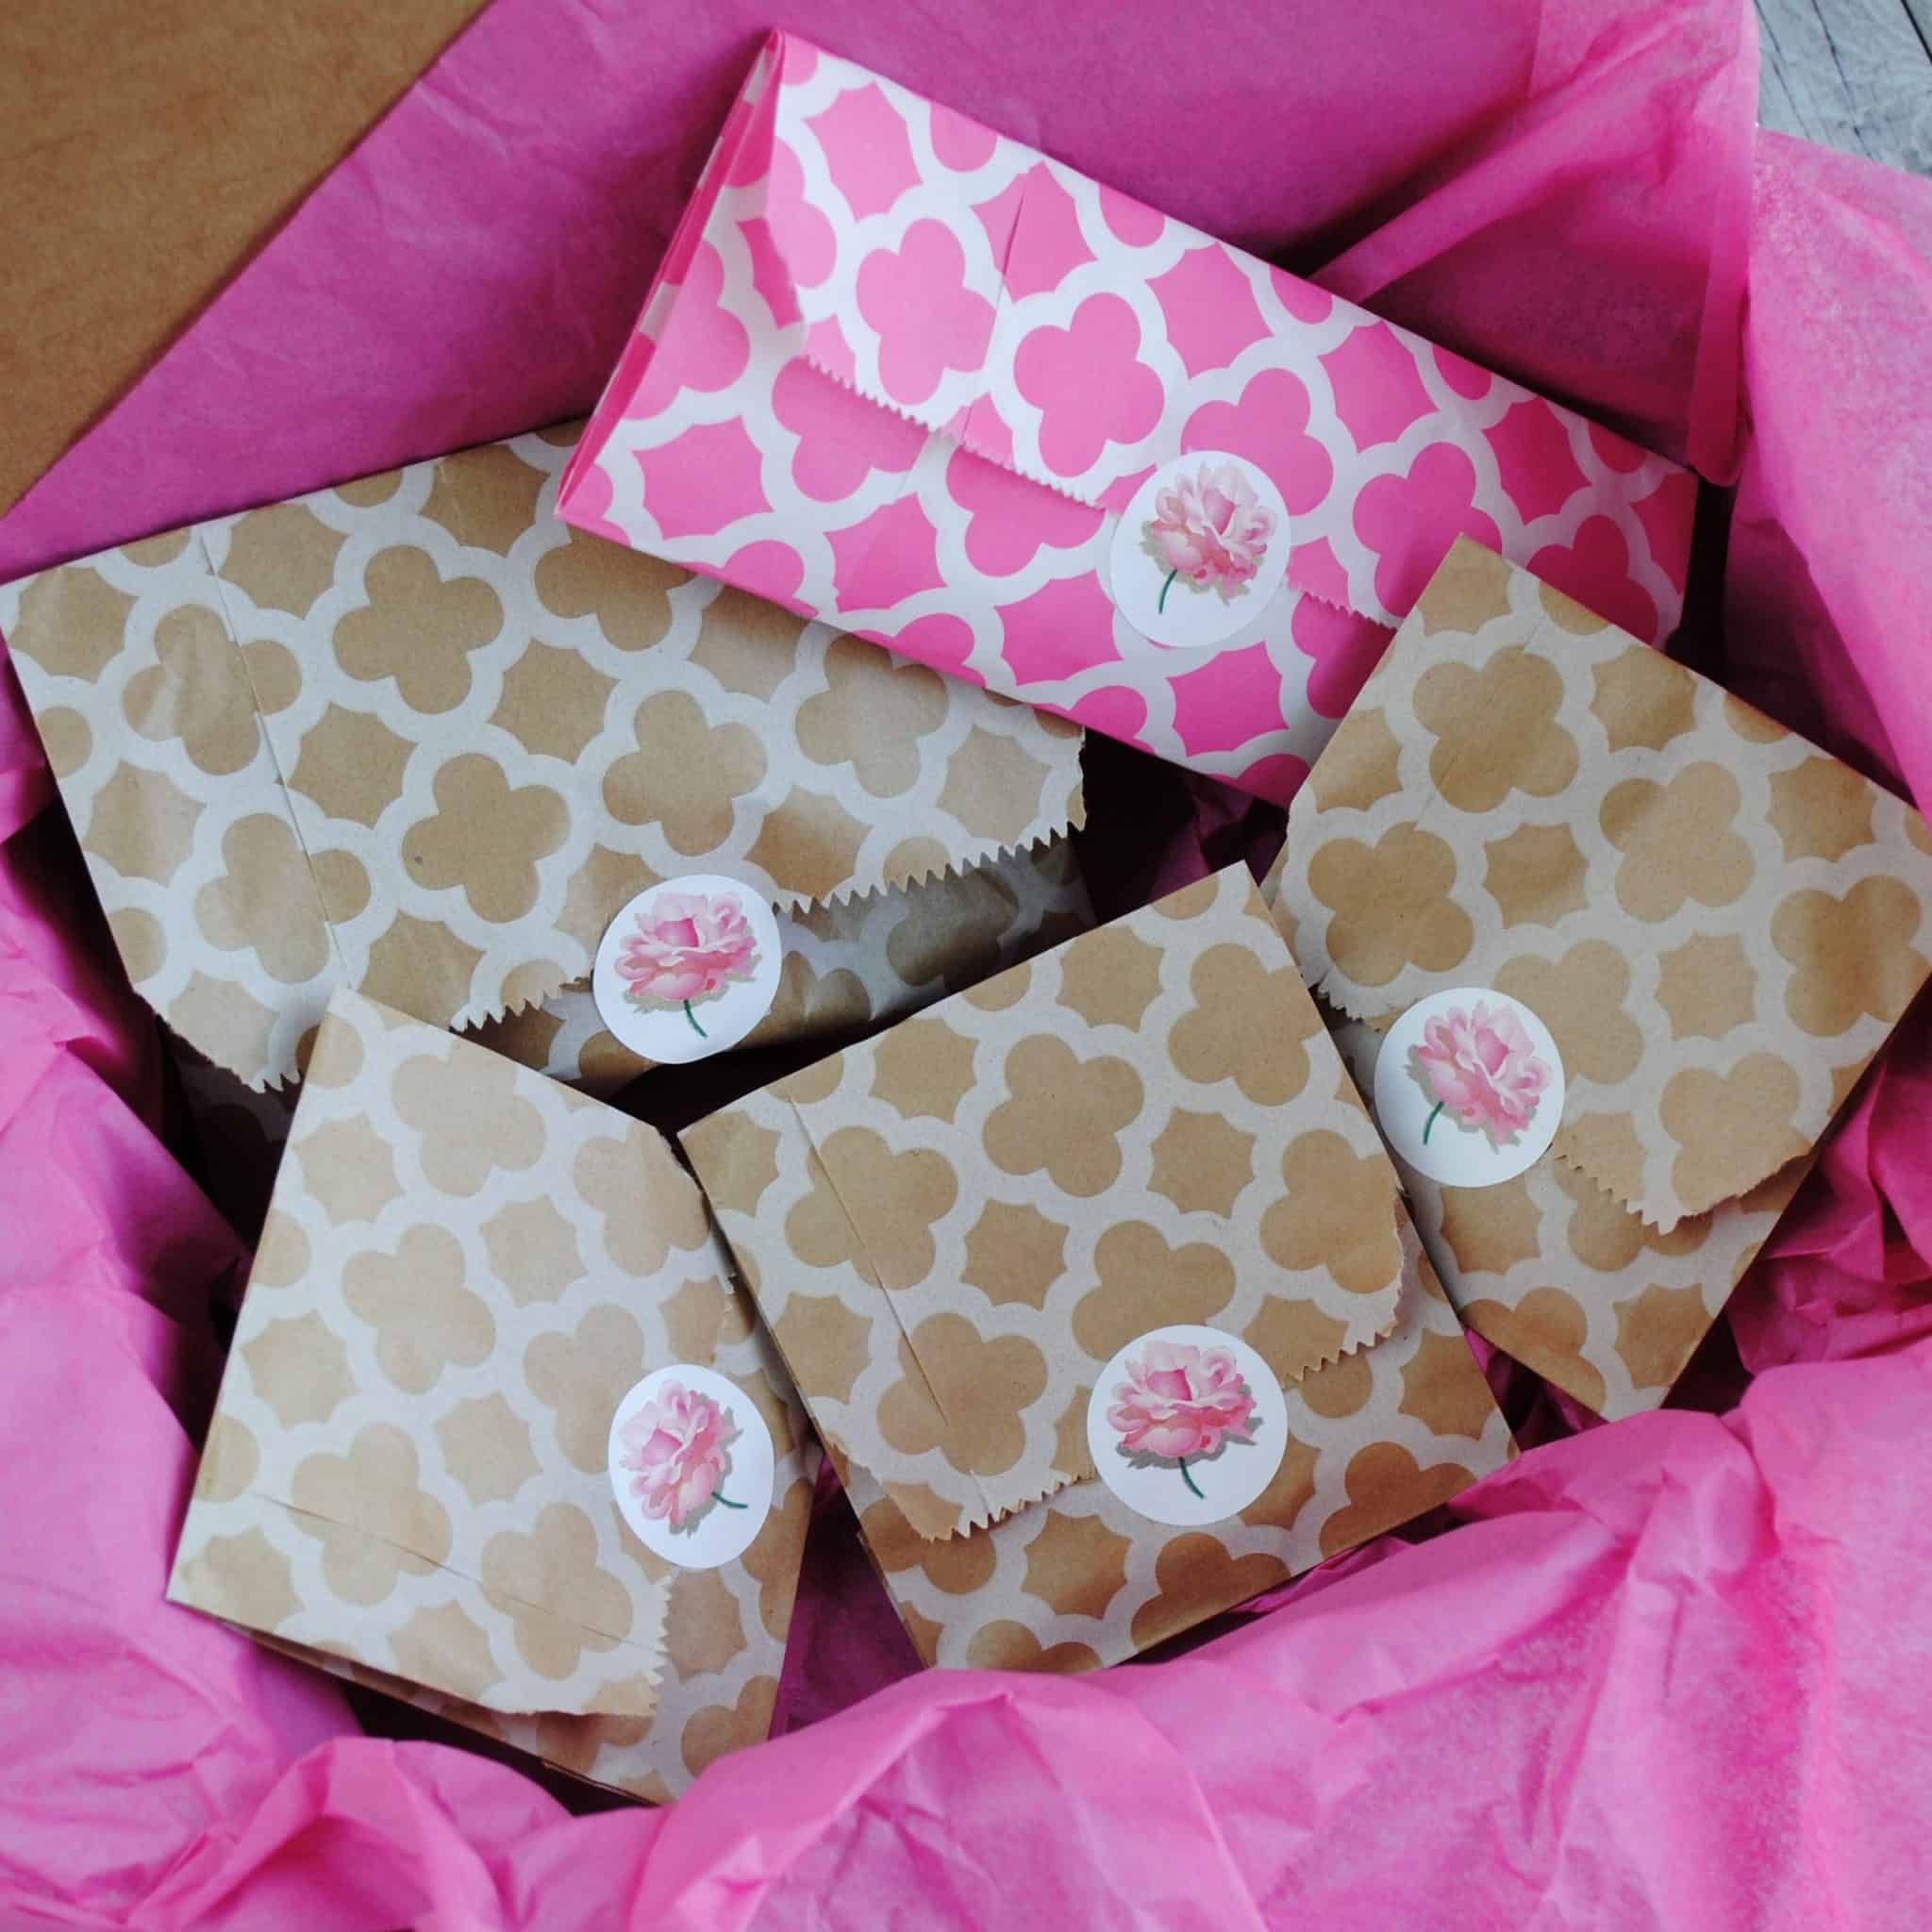 Packages wrapped in pink and kraft tissue paper.